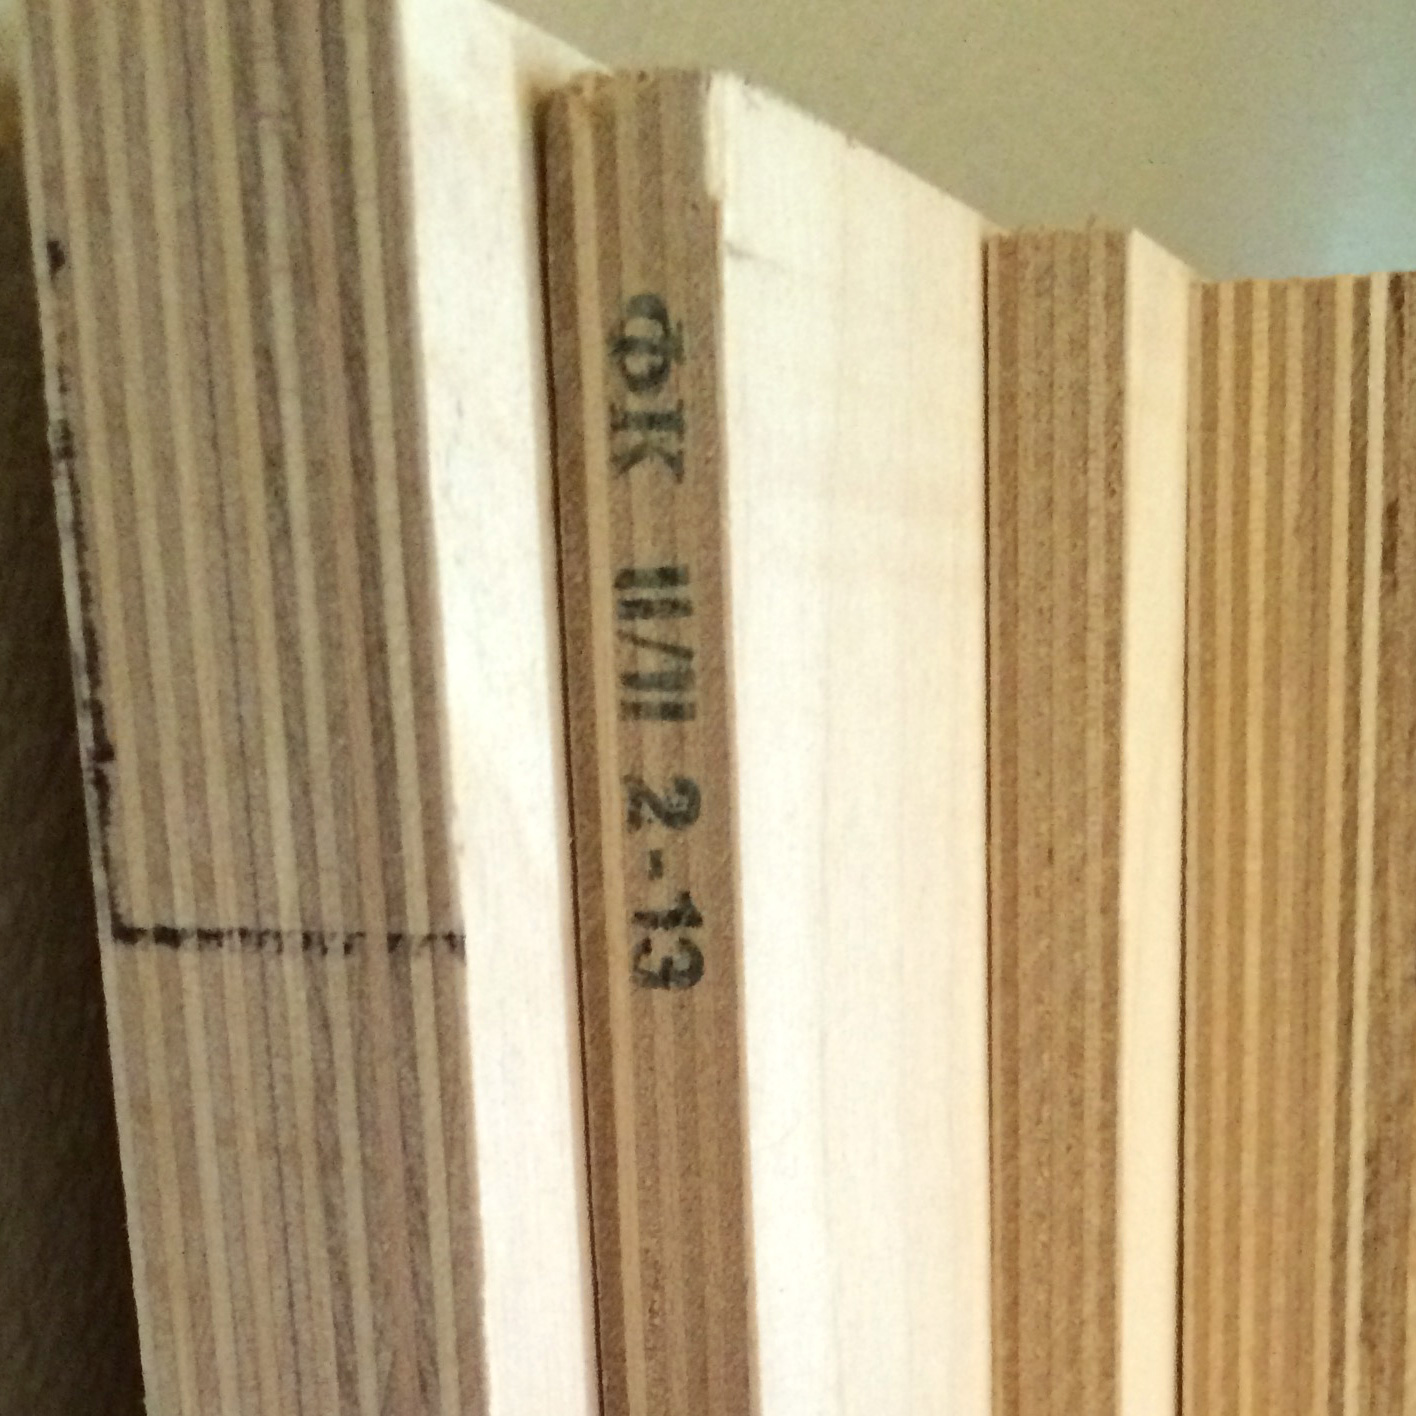 materials to know: baltic birch hackaday